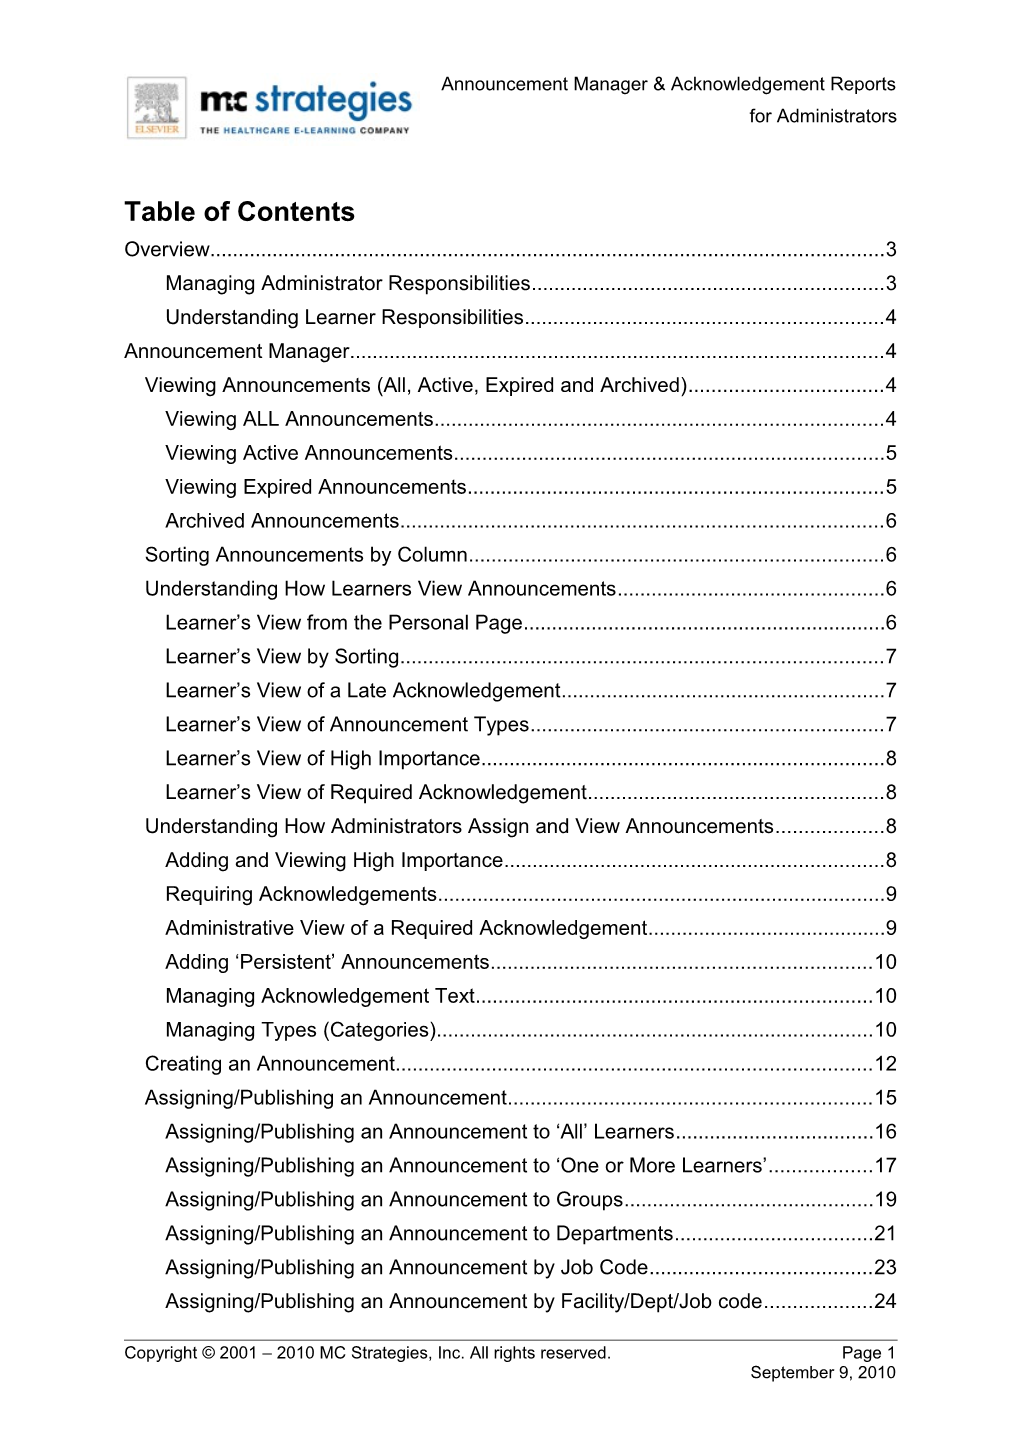 Table of Contents s87